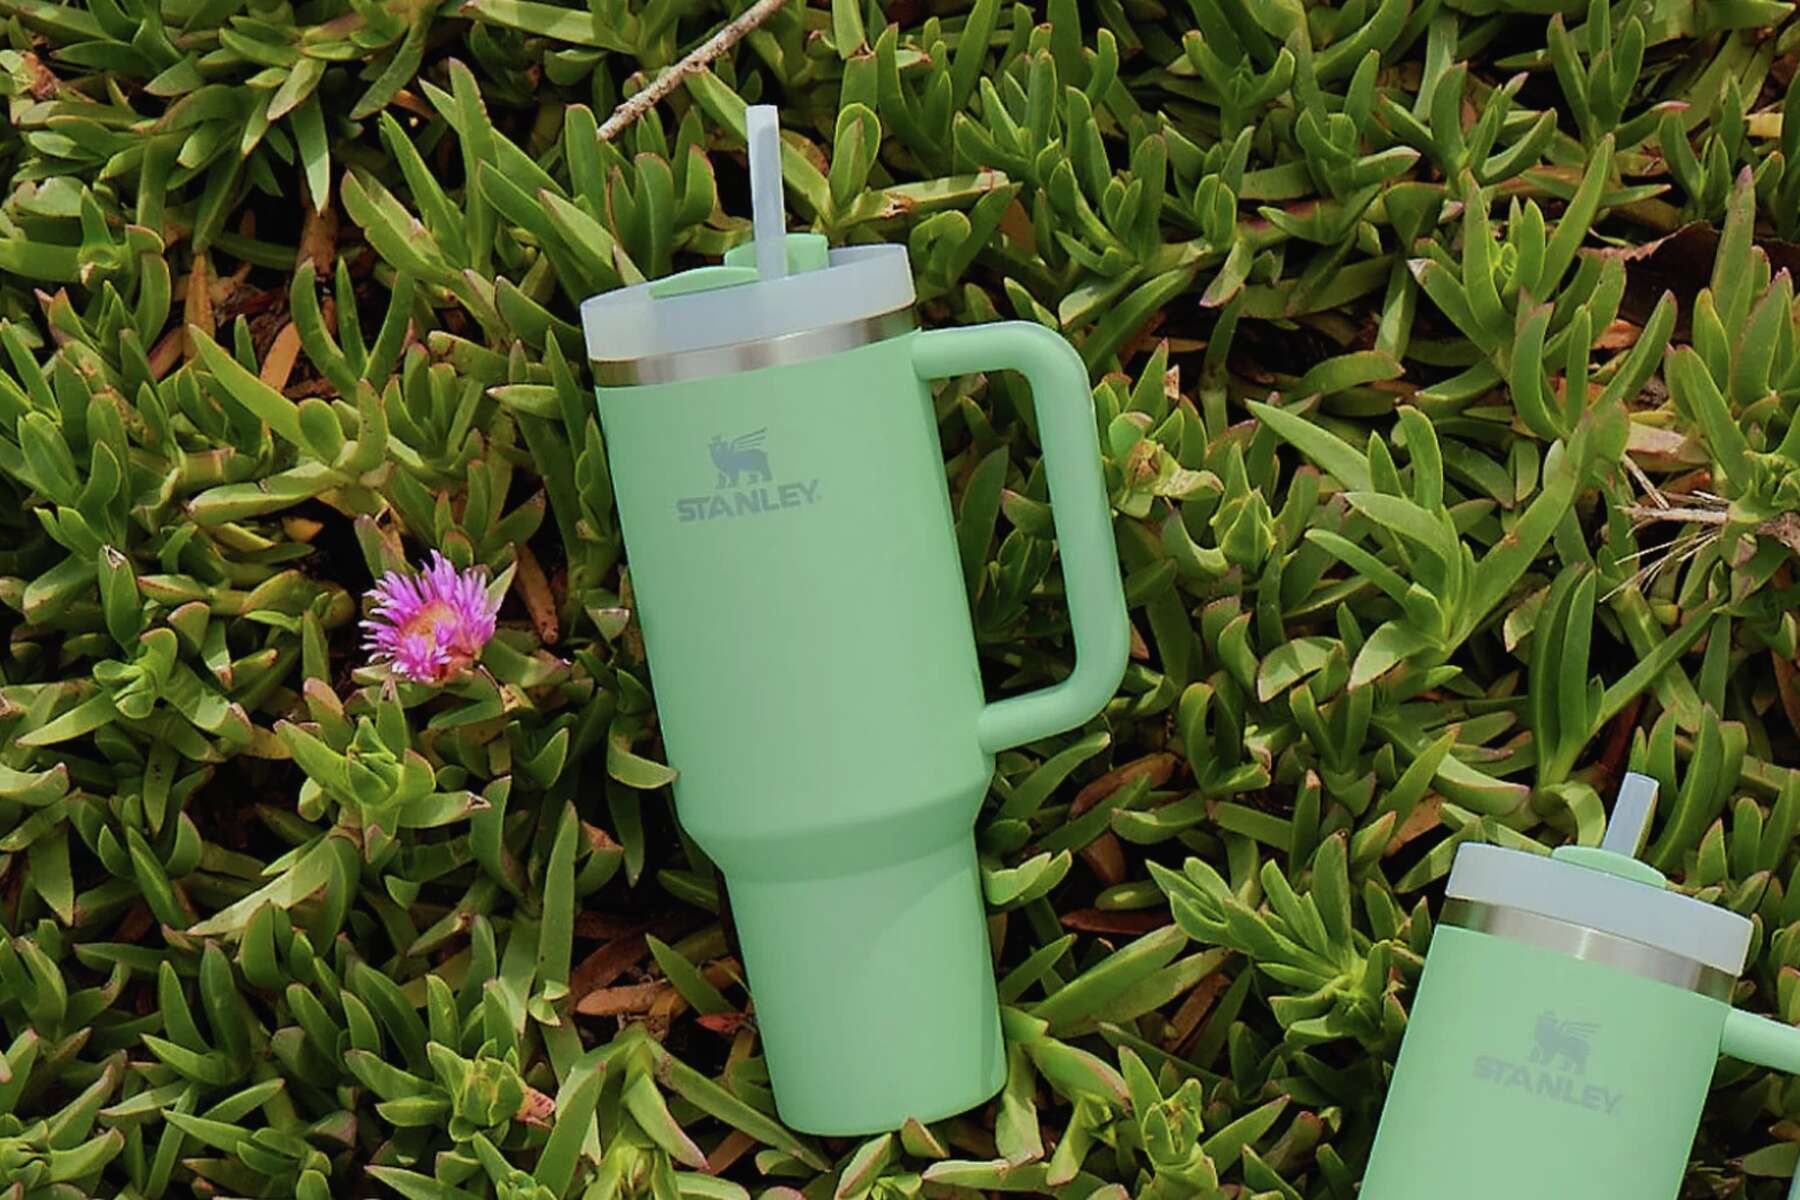 Stanley tumbler restock: Snag 5 popular colors and 2 new ones